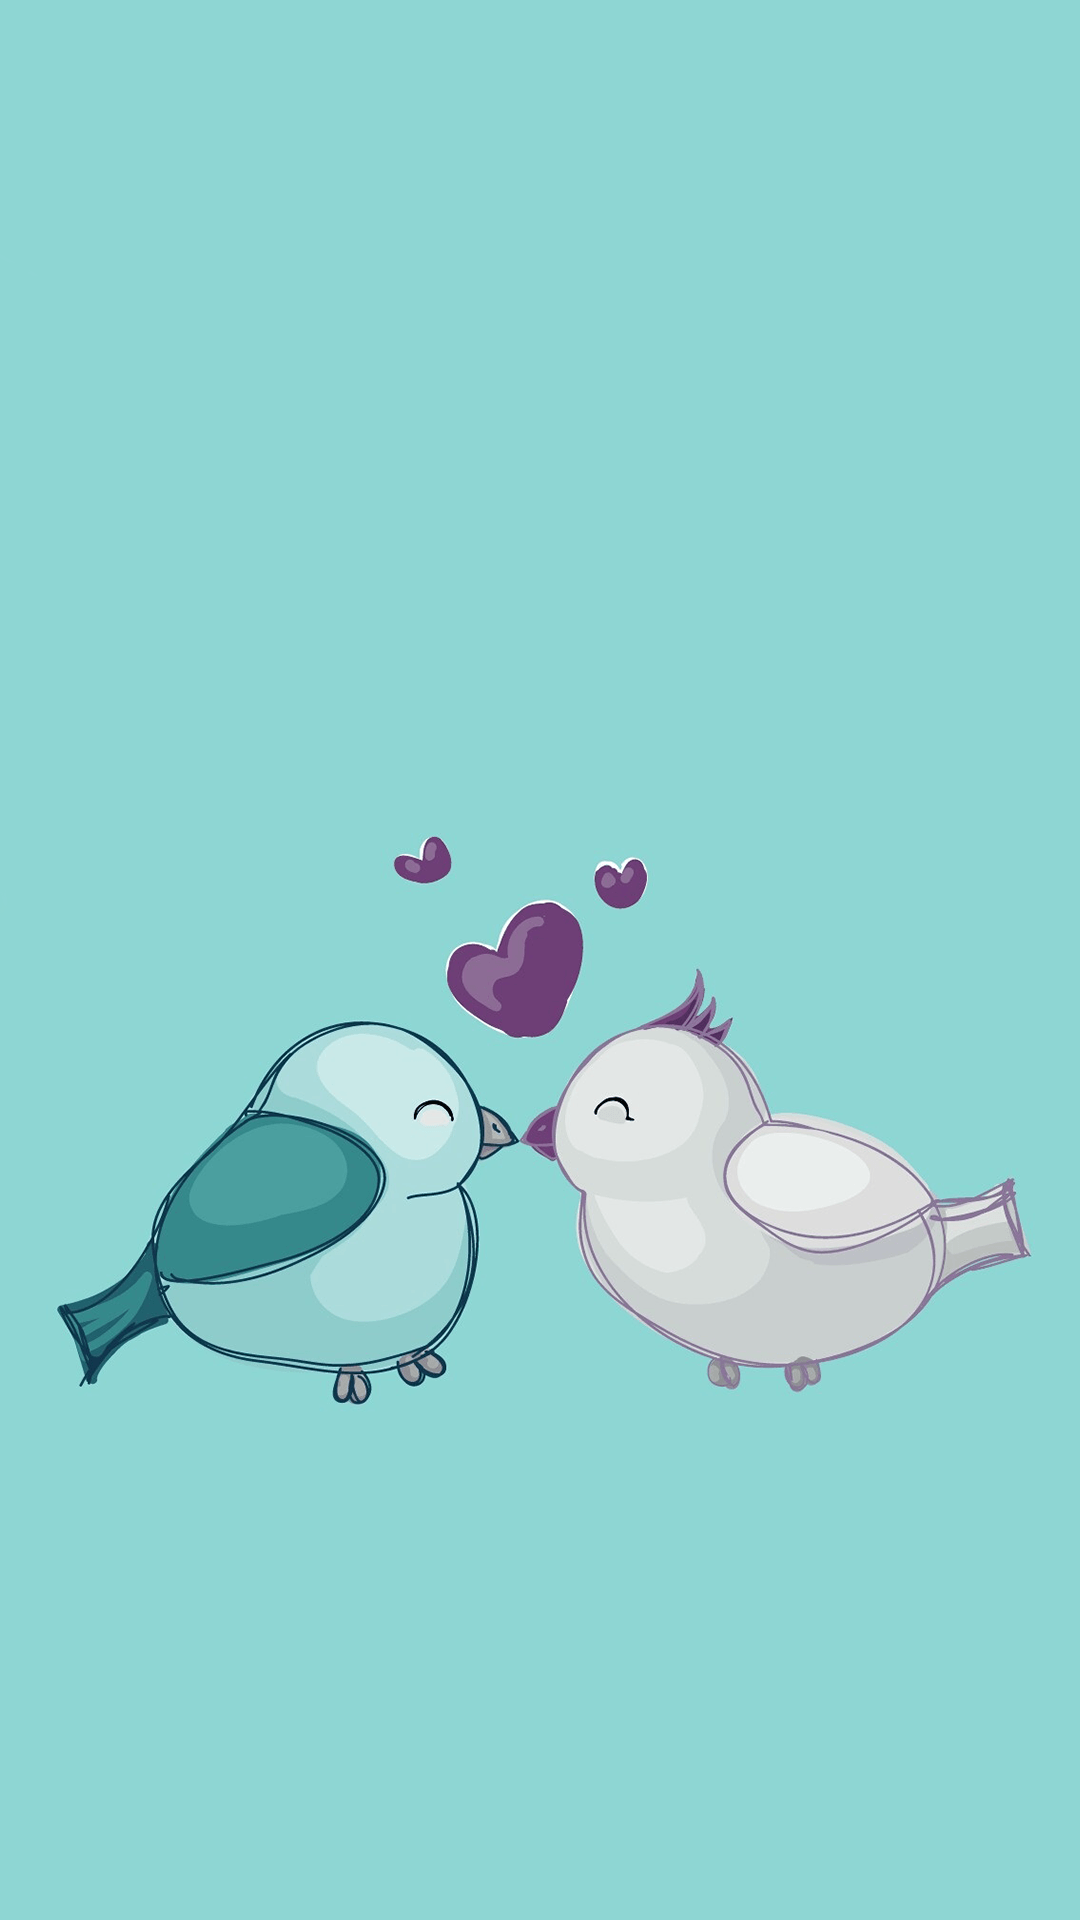 Love birds. The season of love. Tap to see more Valentine's Love